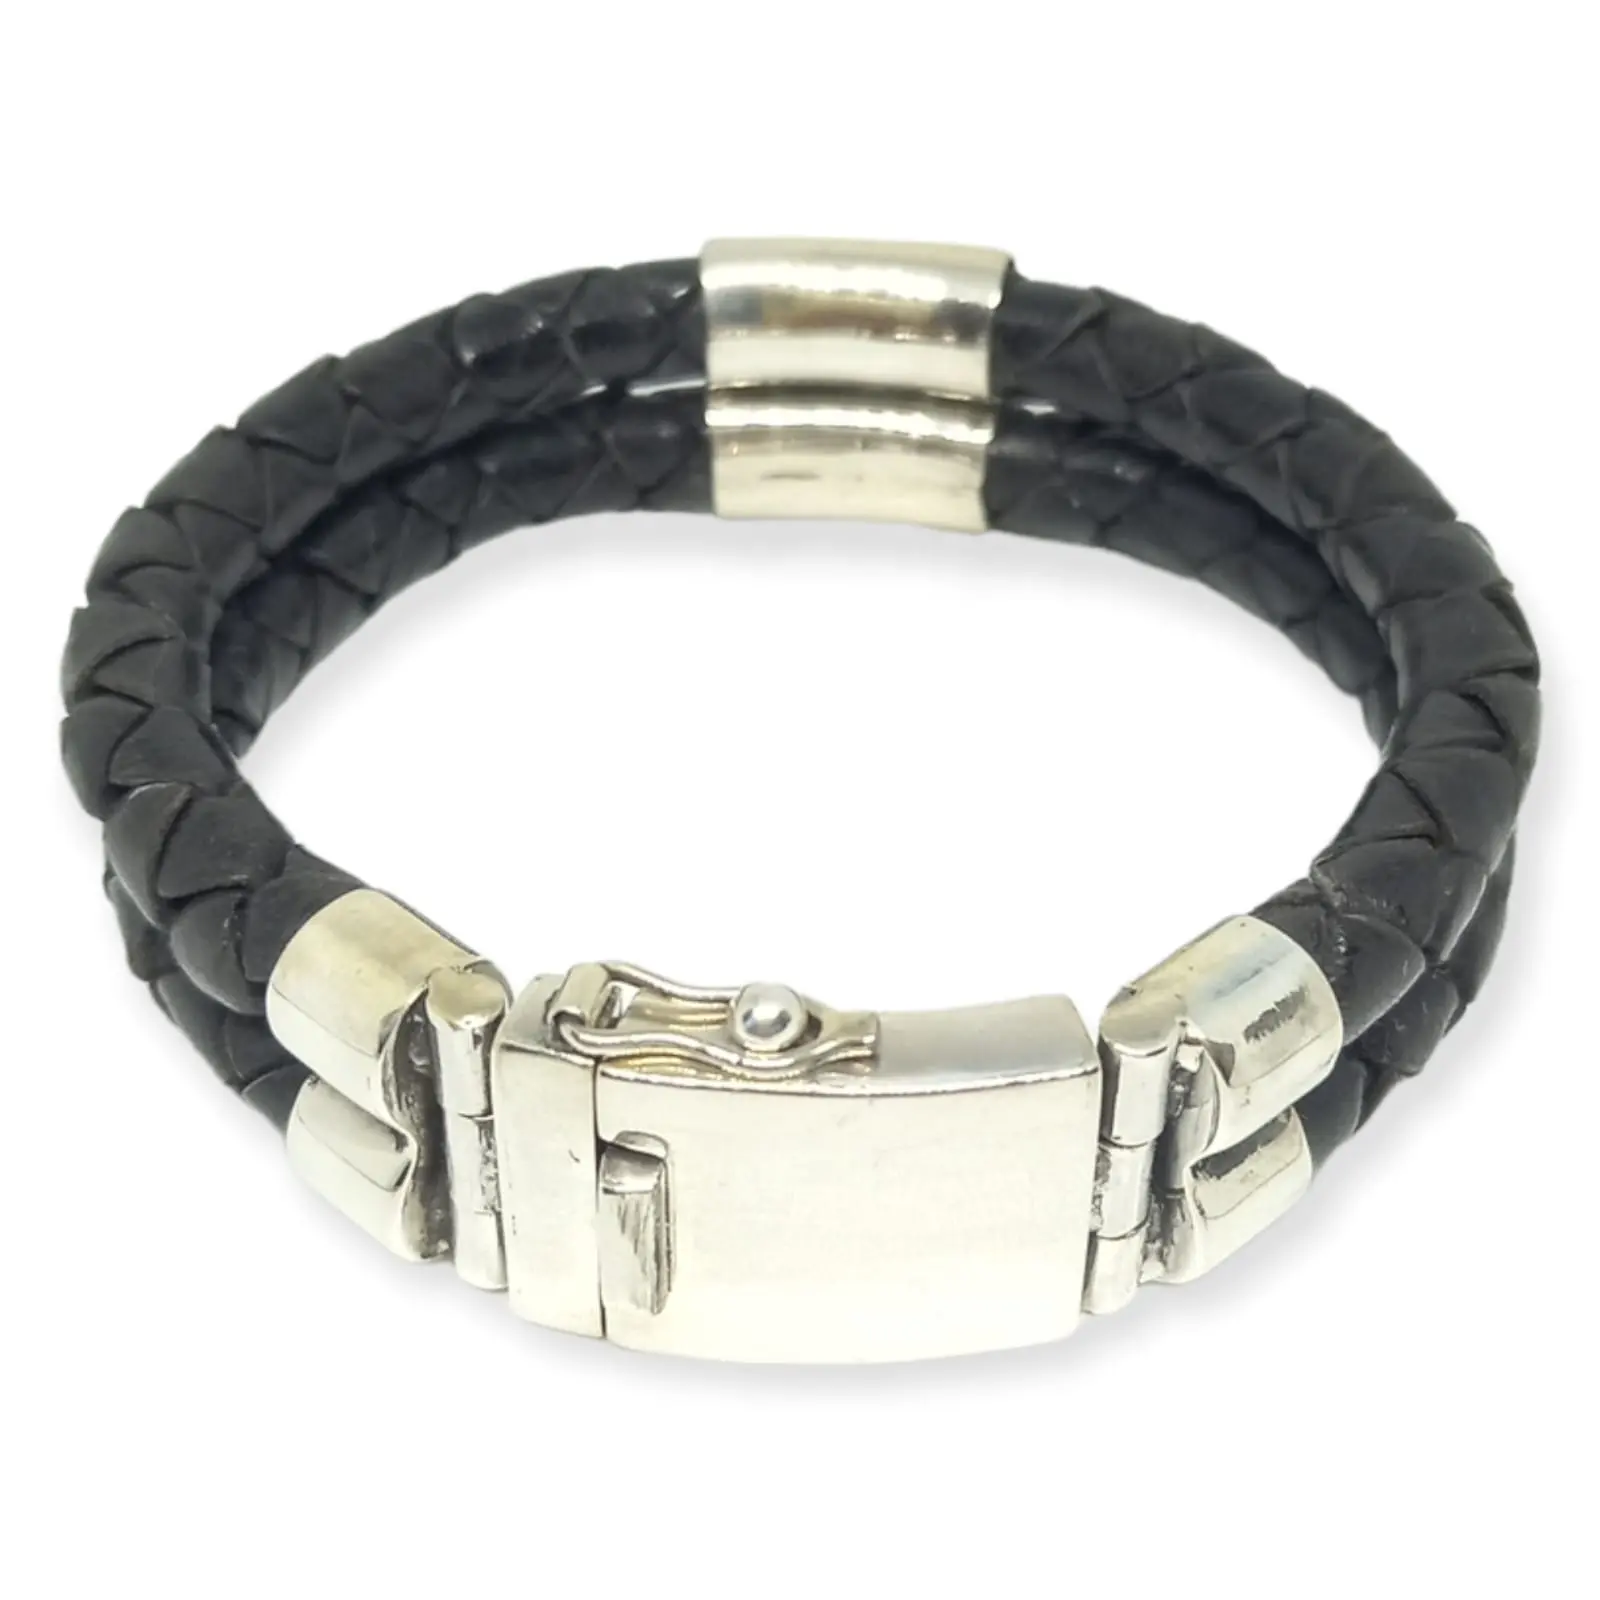 NY-CHB055-Sterling Silver Braided Double Leather Bracelet Biker Accessories For Daily Use Gift For Men And Women